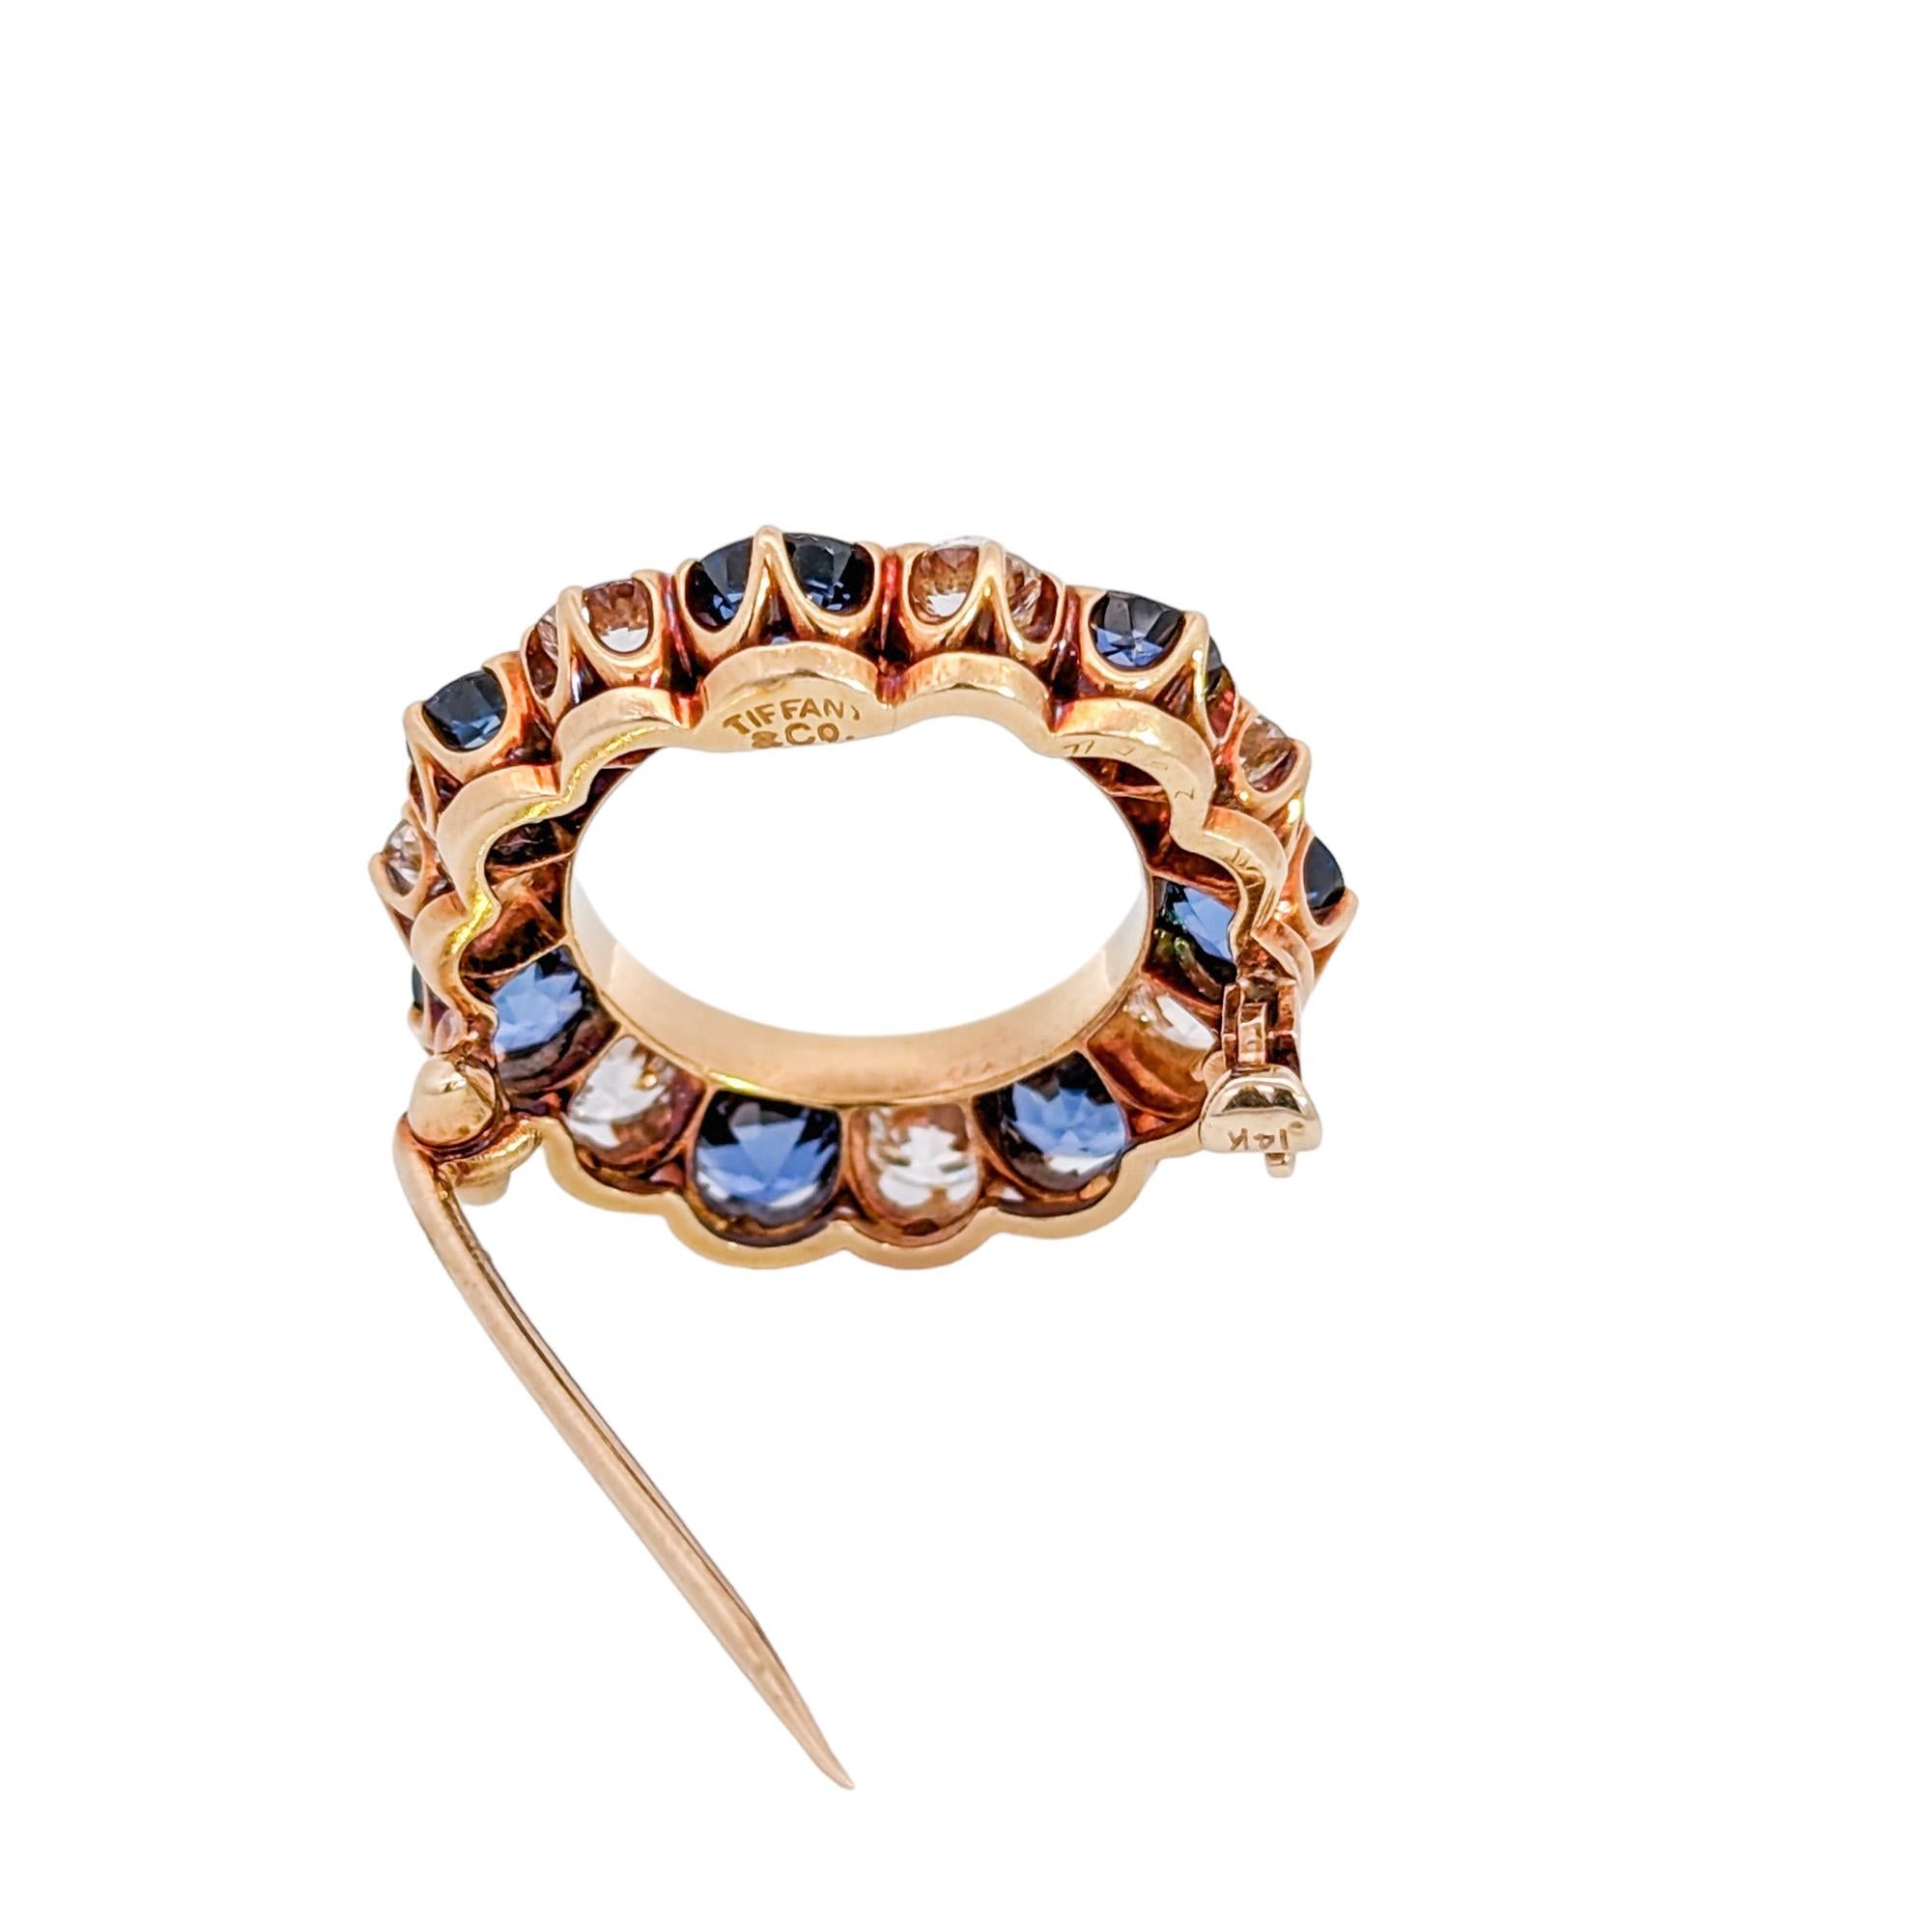 Yogo Gulch sapphires were nearly synonymous with Tiffany & Co. at the turn of the century. This brooch is a lovely, wearable example of the American company's use of these vivid, rare Montana sapphires. Sapphires from Yogo Gulch, Montana, are